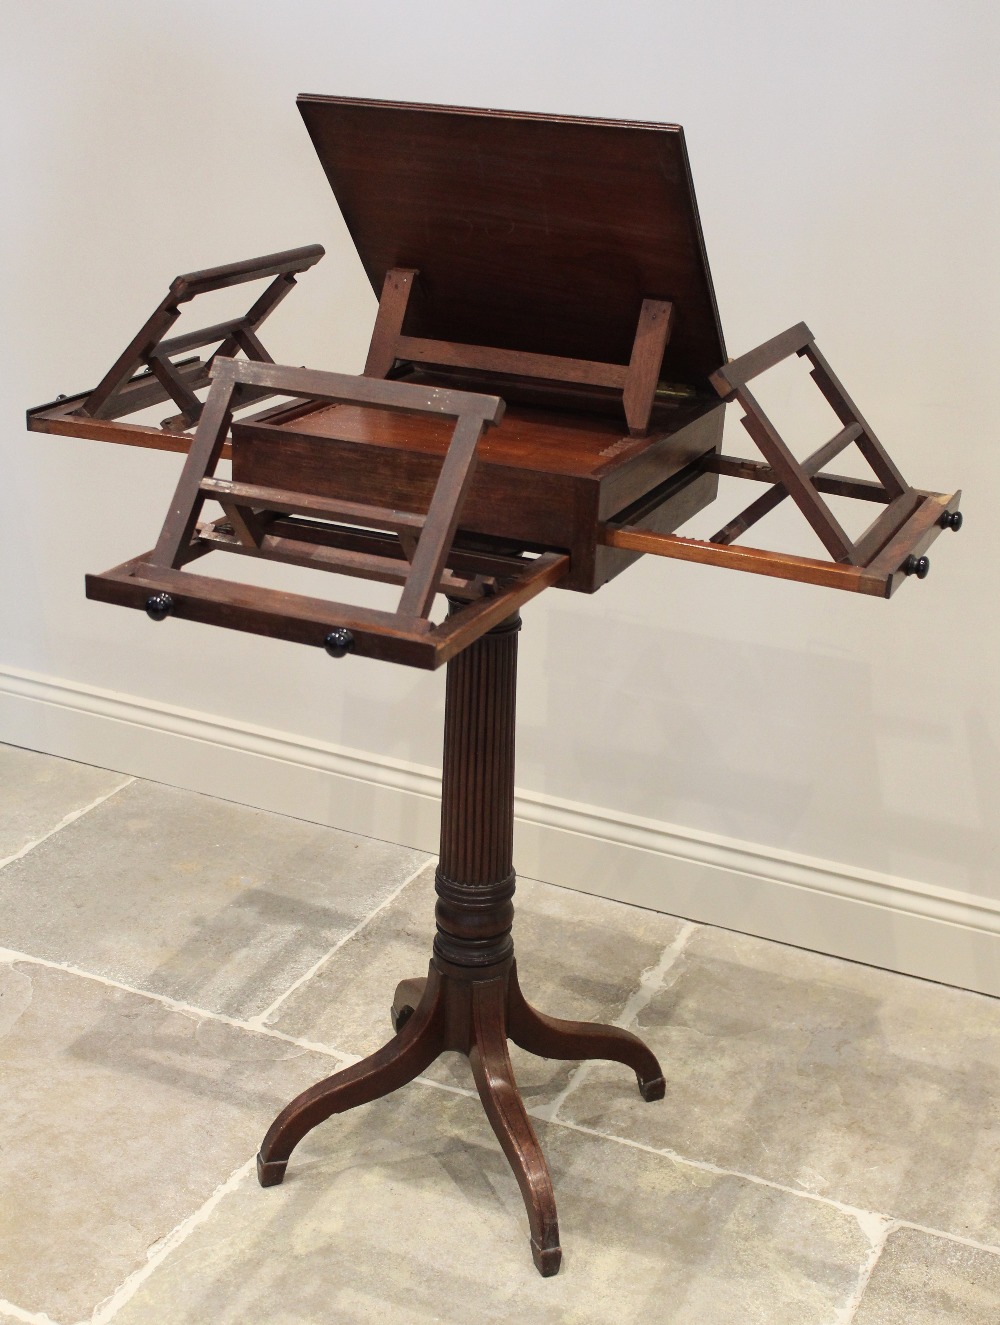 A George III mahogany pedestal quartet music stand, in the manner of Gillows, the rectangular